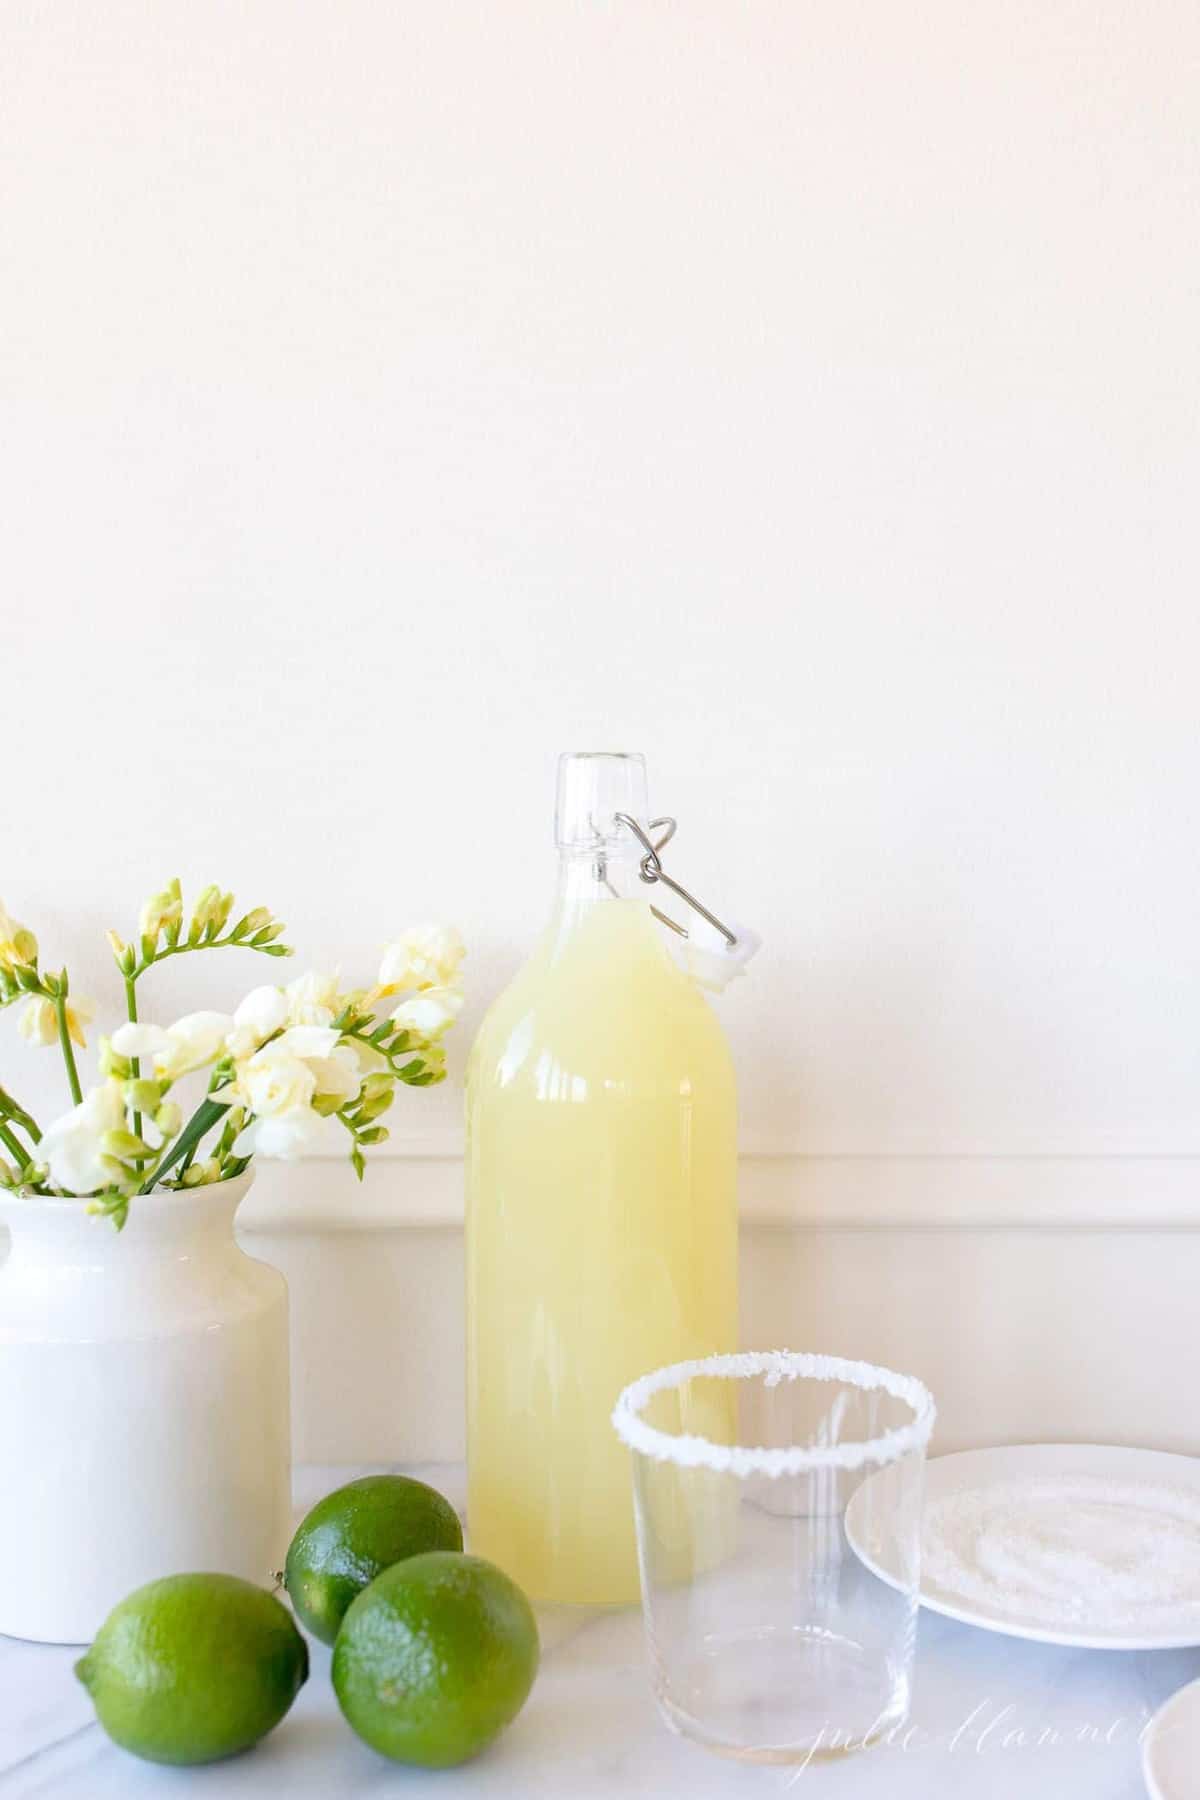 Homemade margarita mix in a glass carafe; a vase full of yellow flowers sits to the side. 